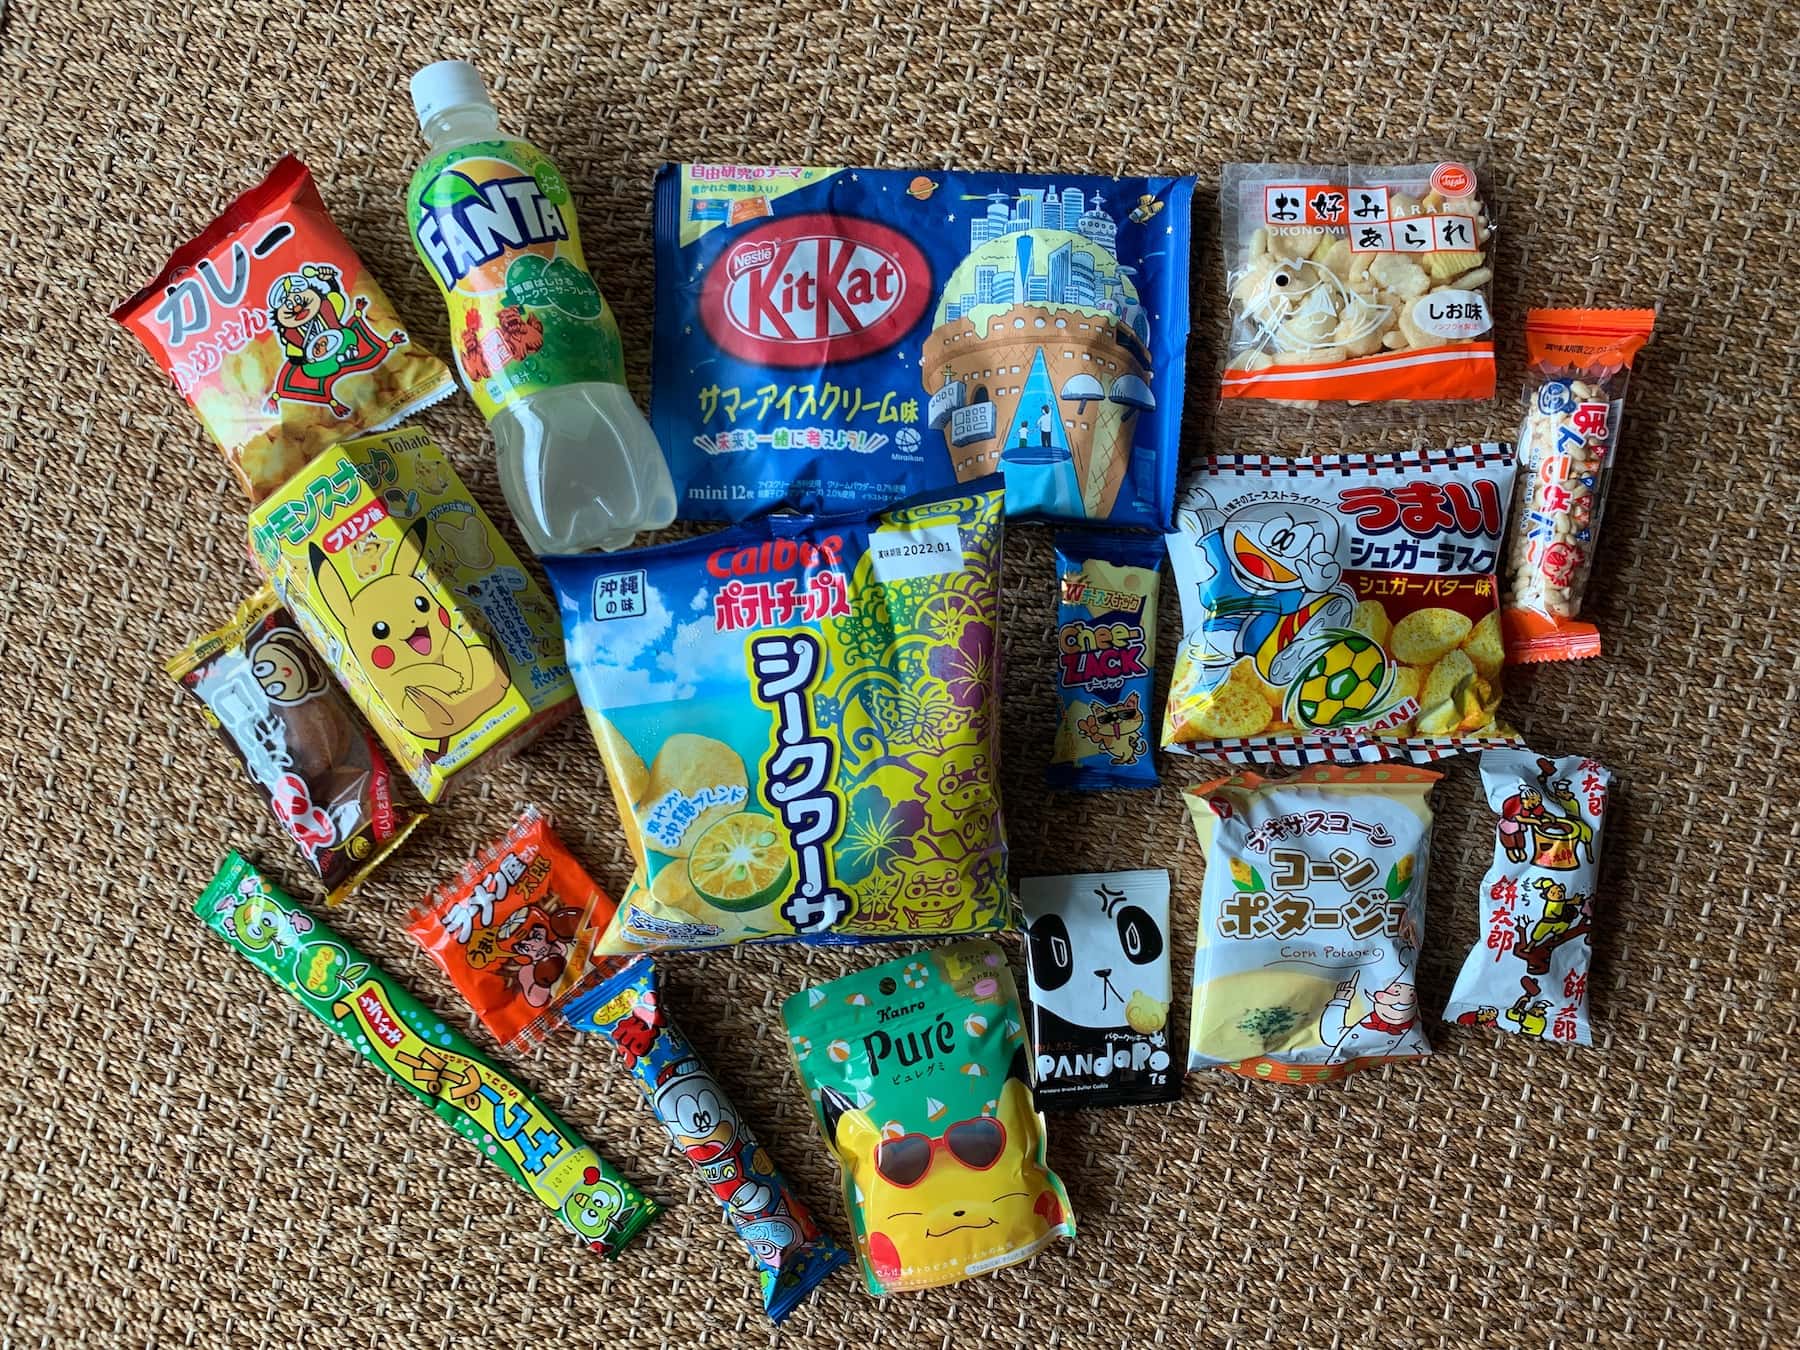 TokyoTreat Review: Unboxing the Snack Box! - FOODICLES